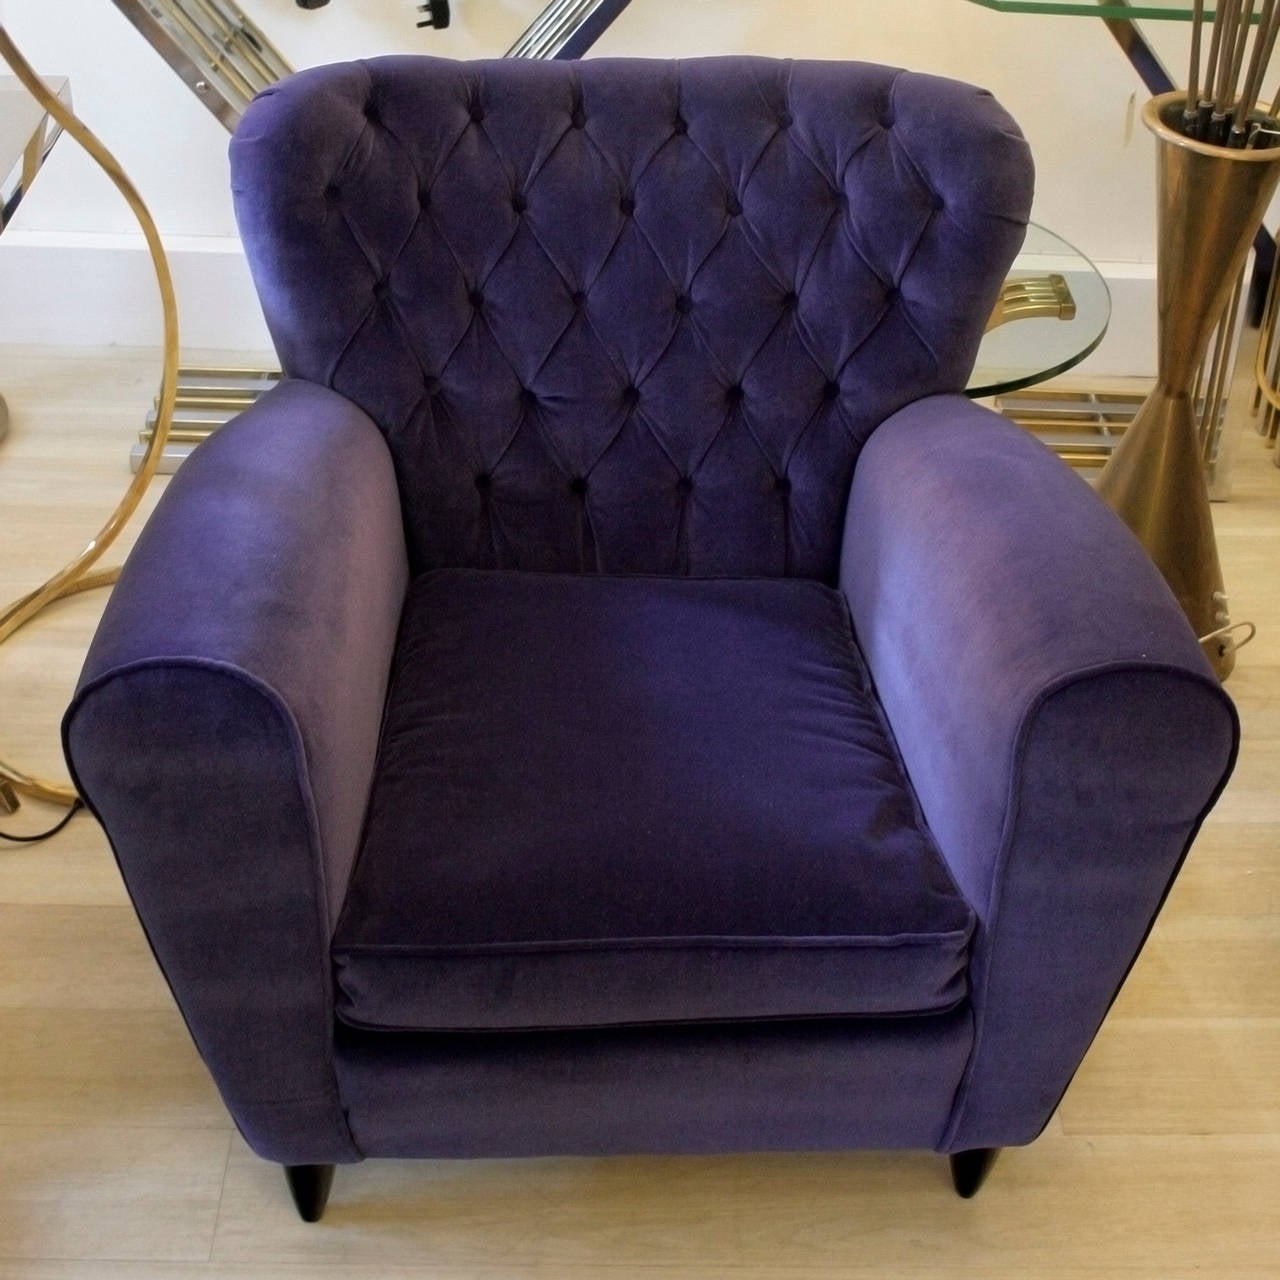 Pair of Armchairs in style of  Guglielmo Ulrich In Excellent Condition For Sale In London, GB